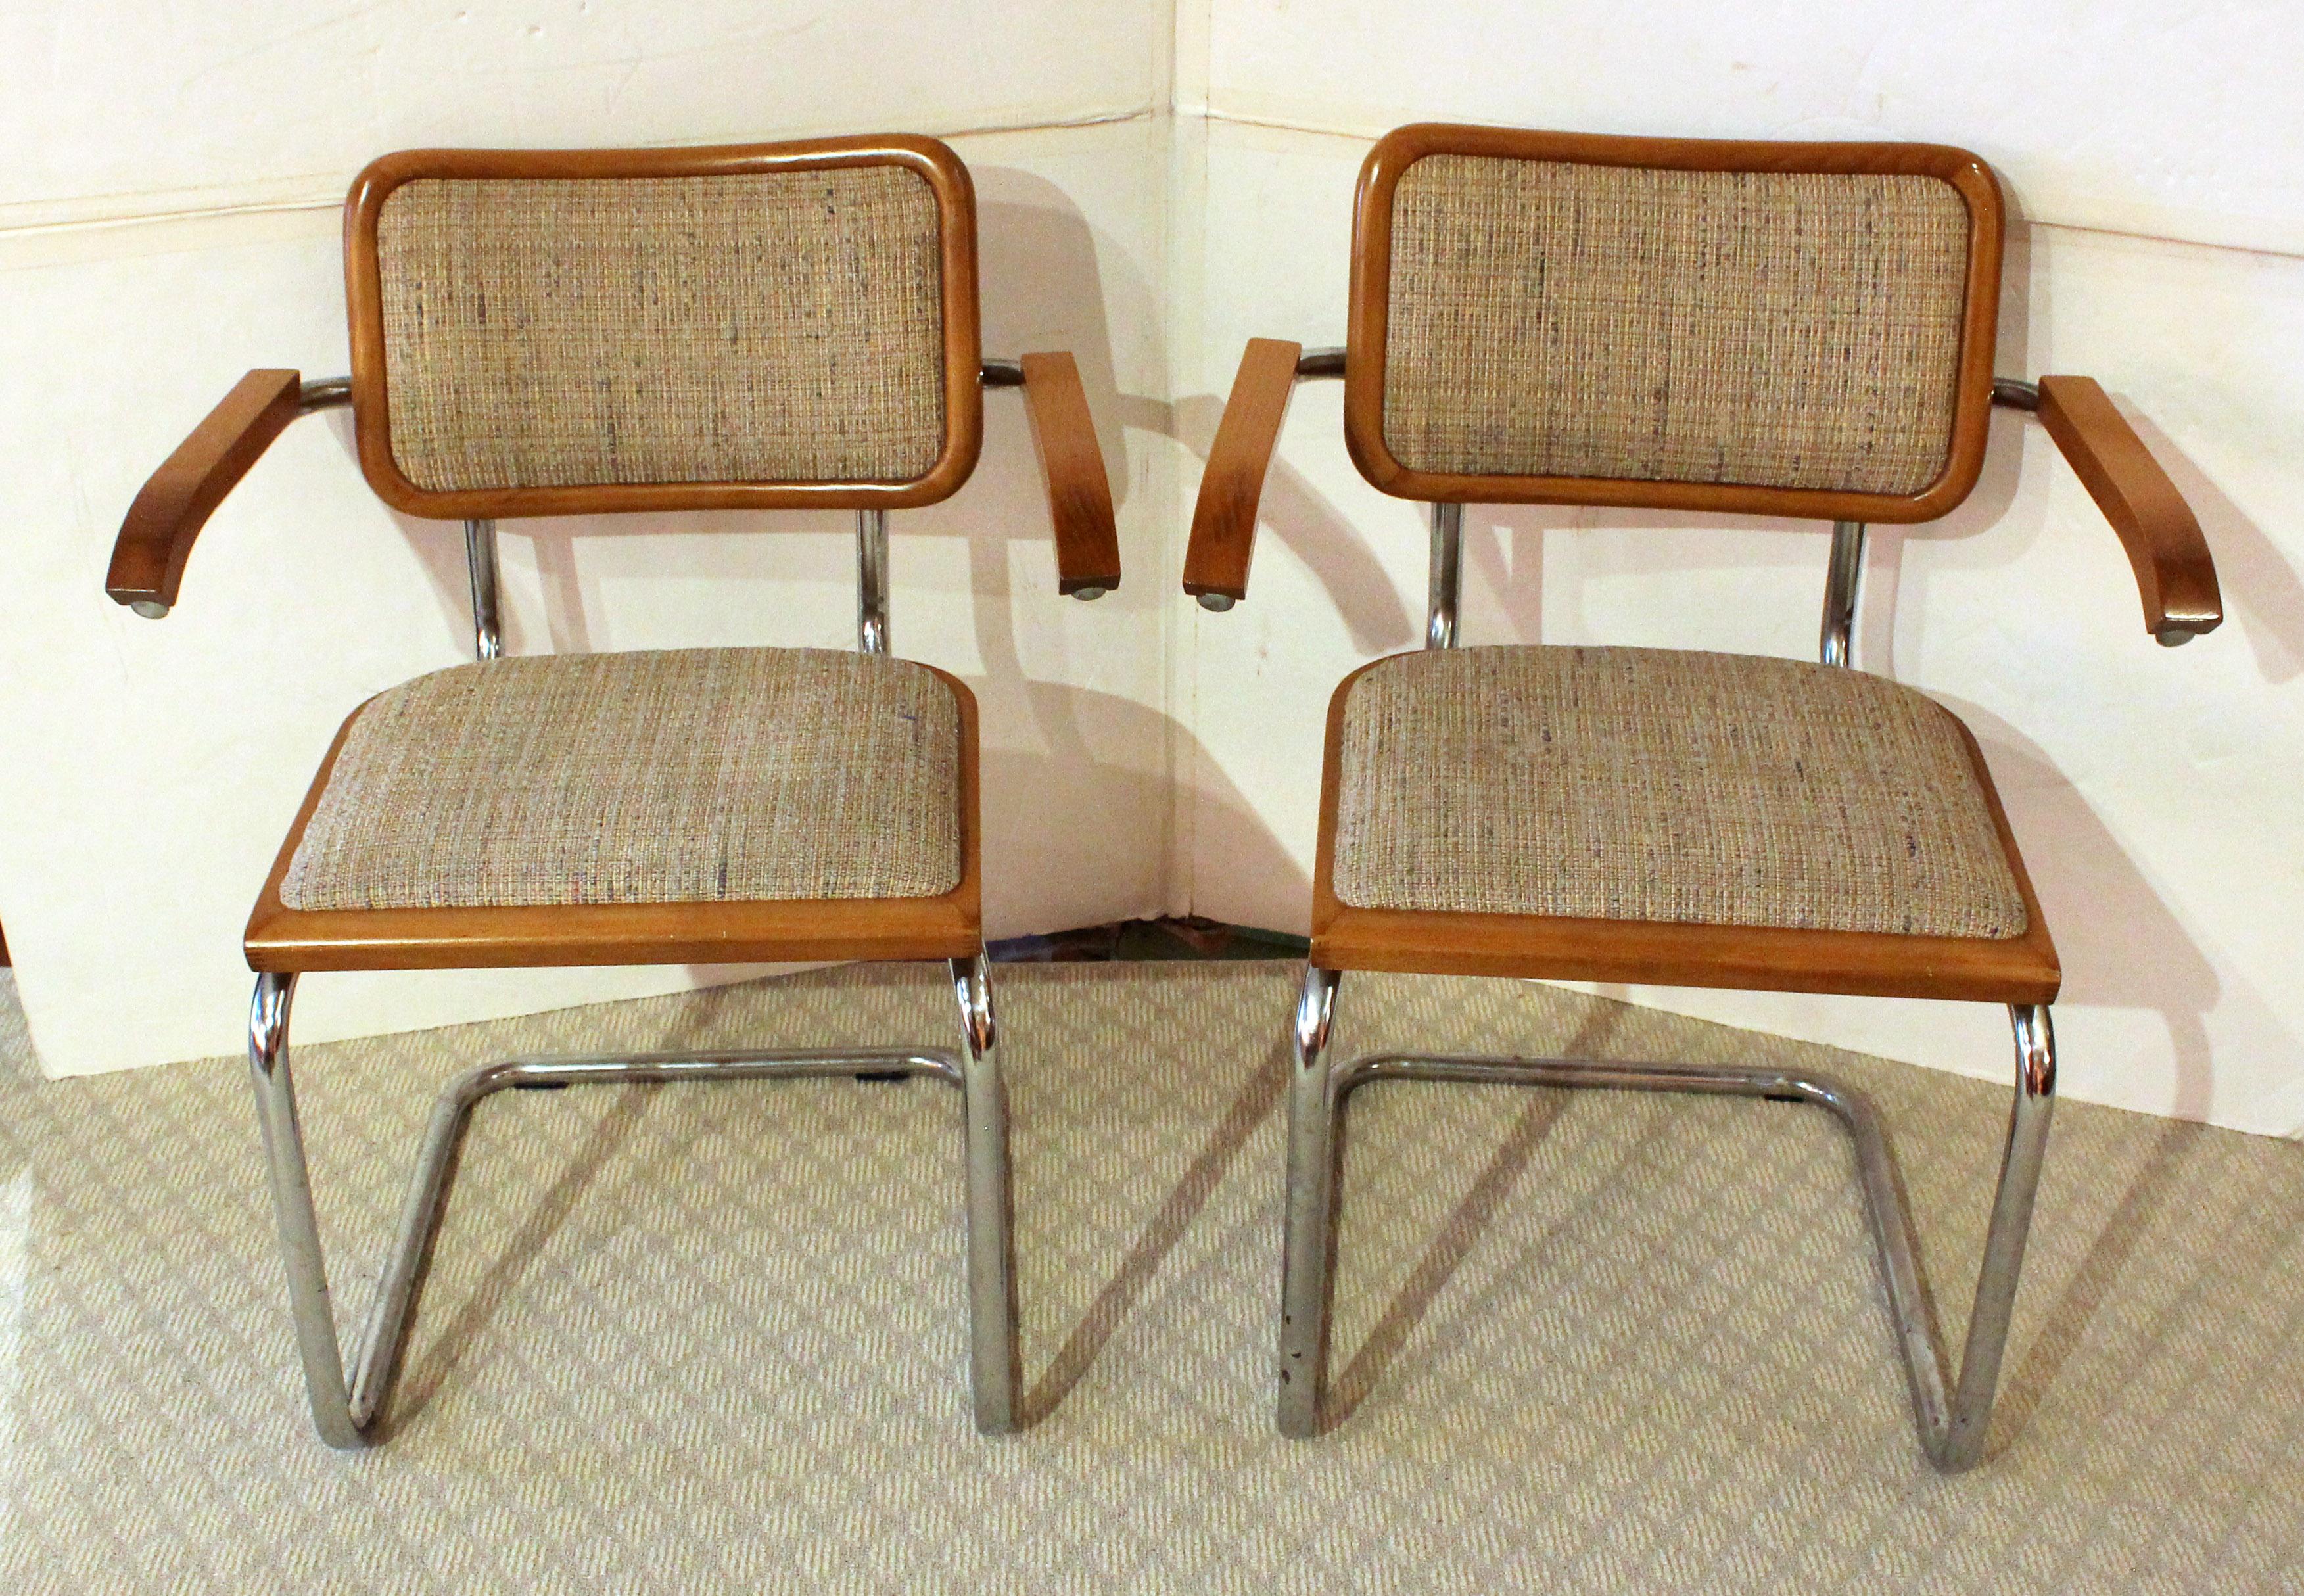 Mid century modern pair of Marcel Breuer Cesca Arm Chairs, mid-1970s, Italian. These have had only one owner. They lack the foot pads & are upholstered in rough woven period style fabric. Original 